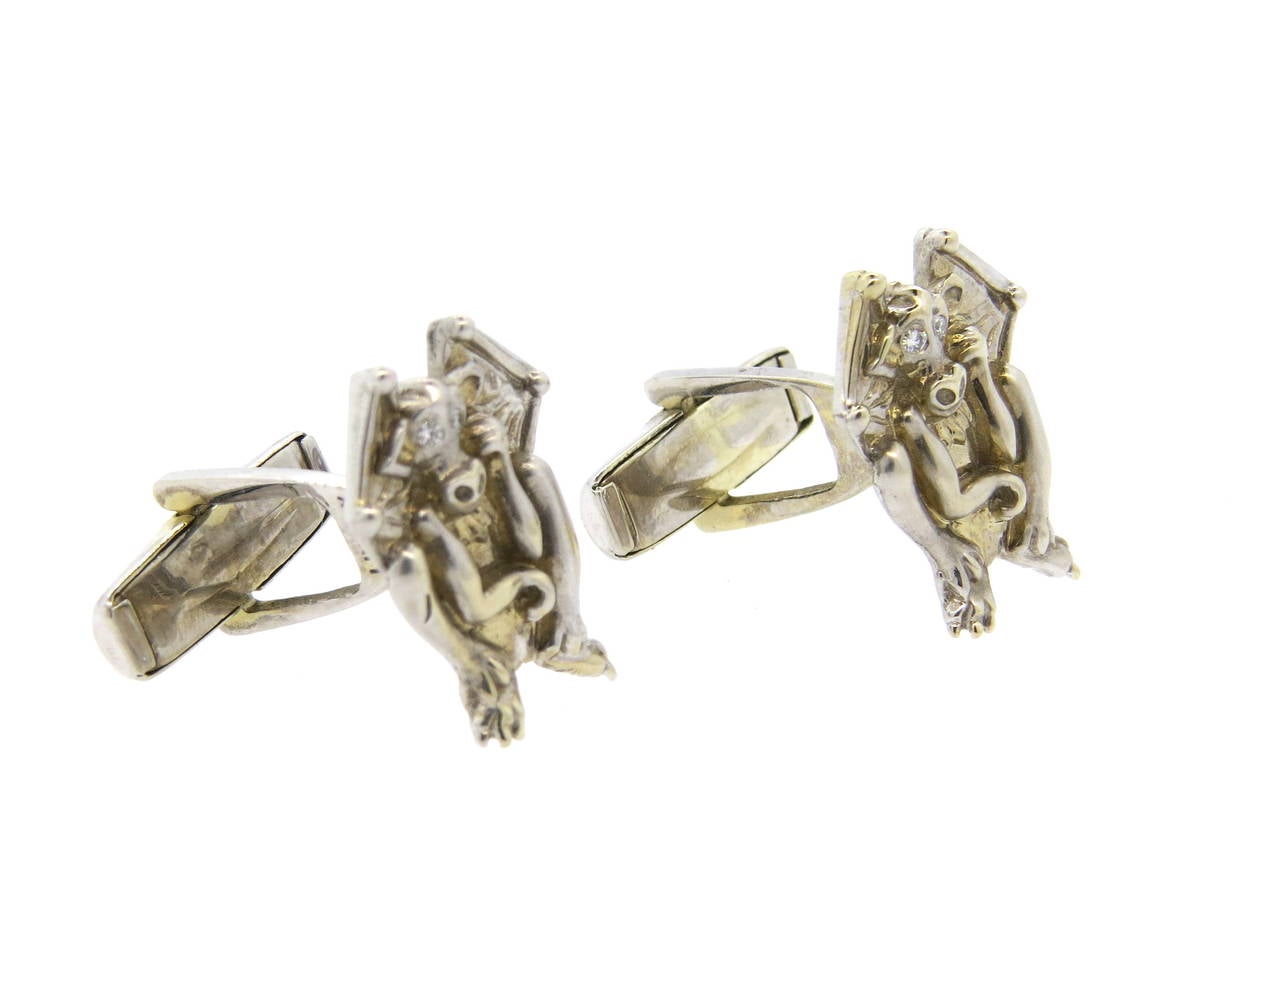 Whimsical and unusual pair of 14k white gold cufflinks by Lindsay & Co, featuring mythical creatures - winged goblins with diamond eyes. Tops measure 21mm x 16mm. Marked Lindsay and 14k. Weight - 14.1 grams